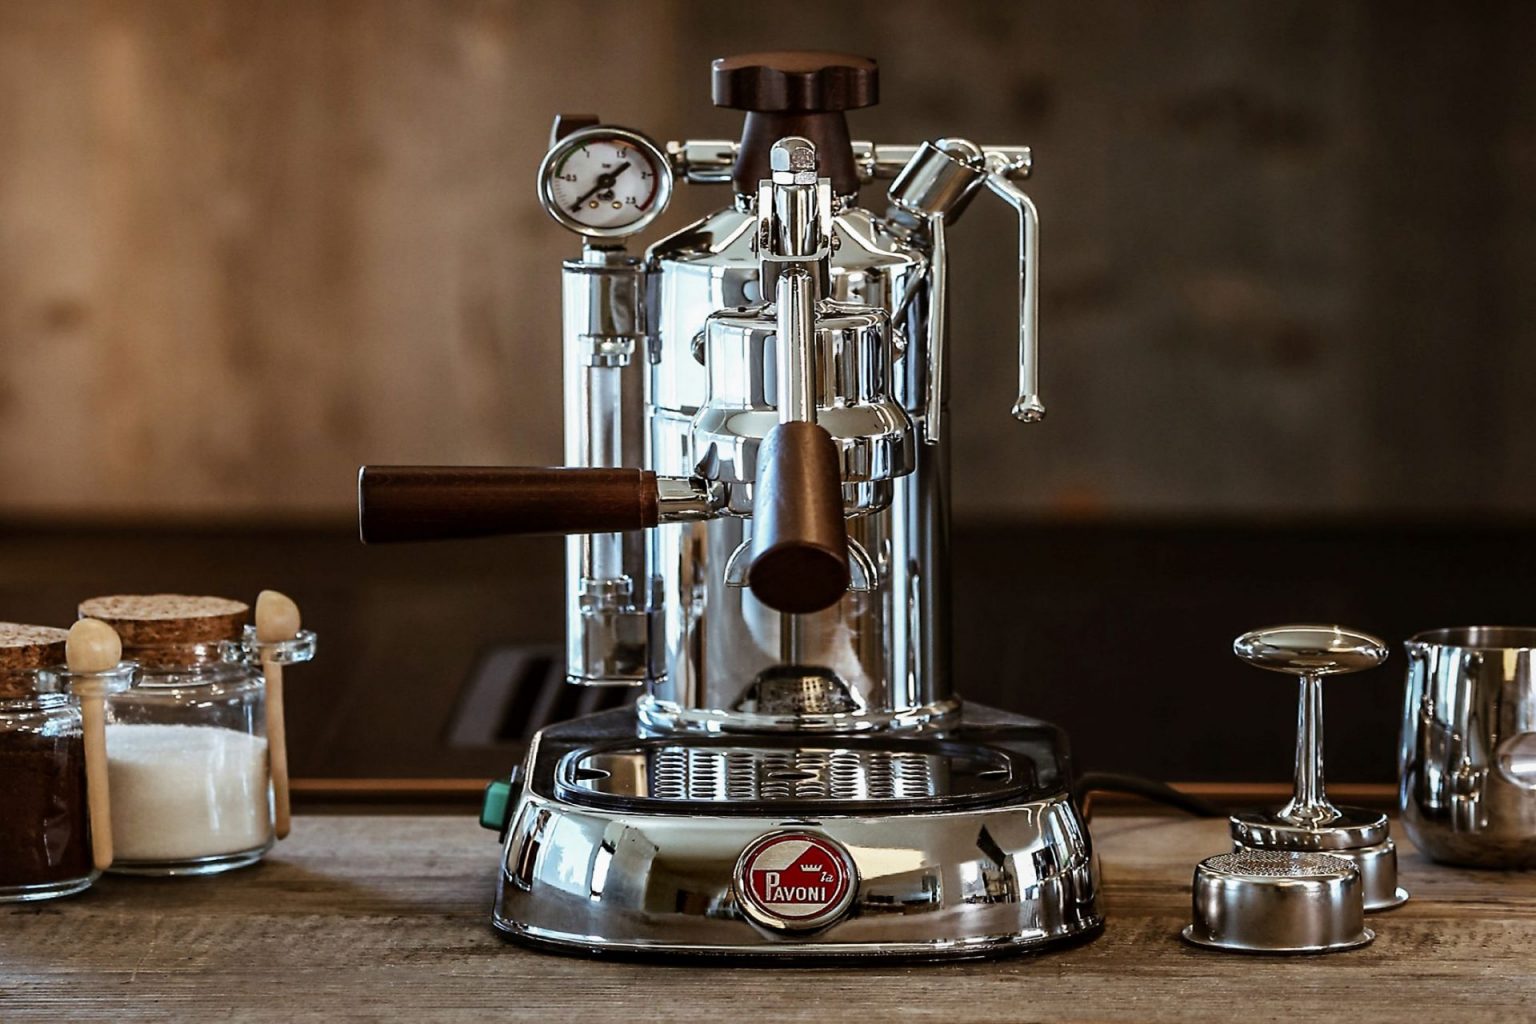 La Pavoni Coffee Maker as a Luxury Masterpiece of Technology and Art